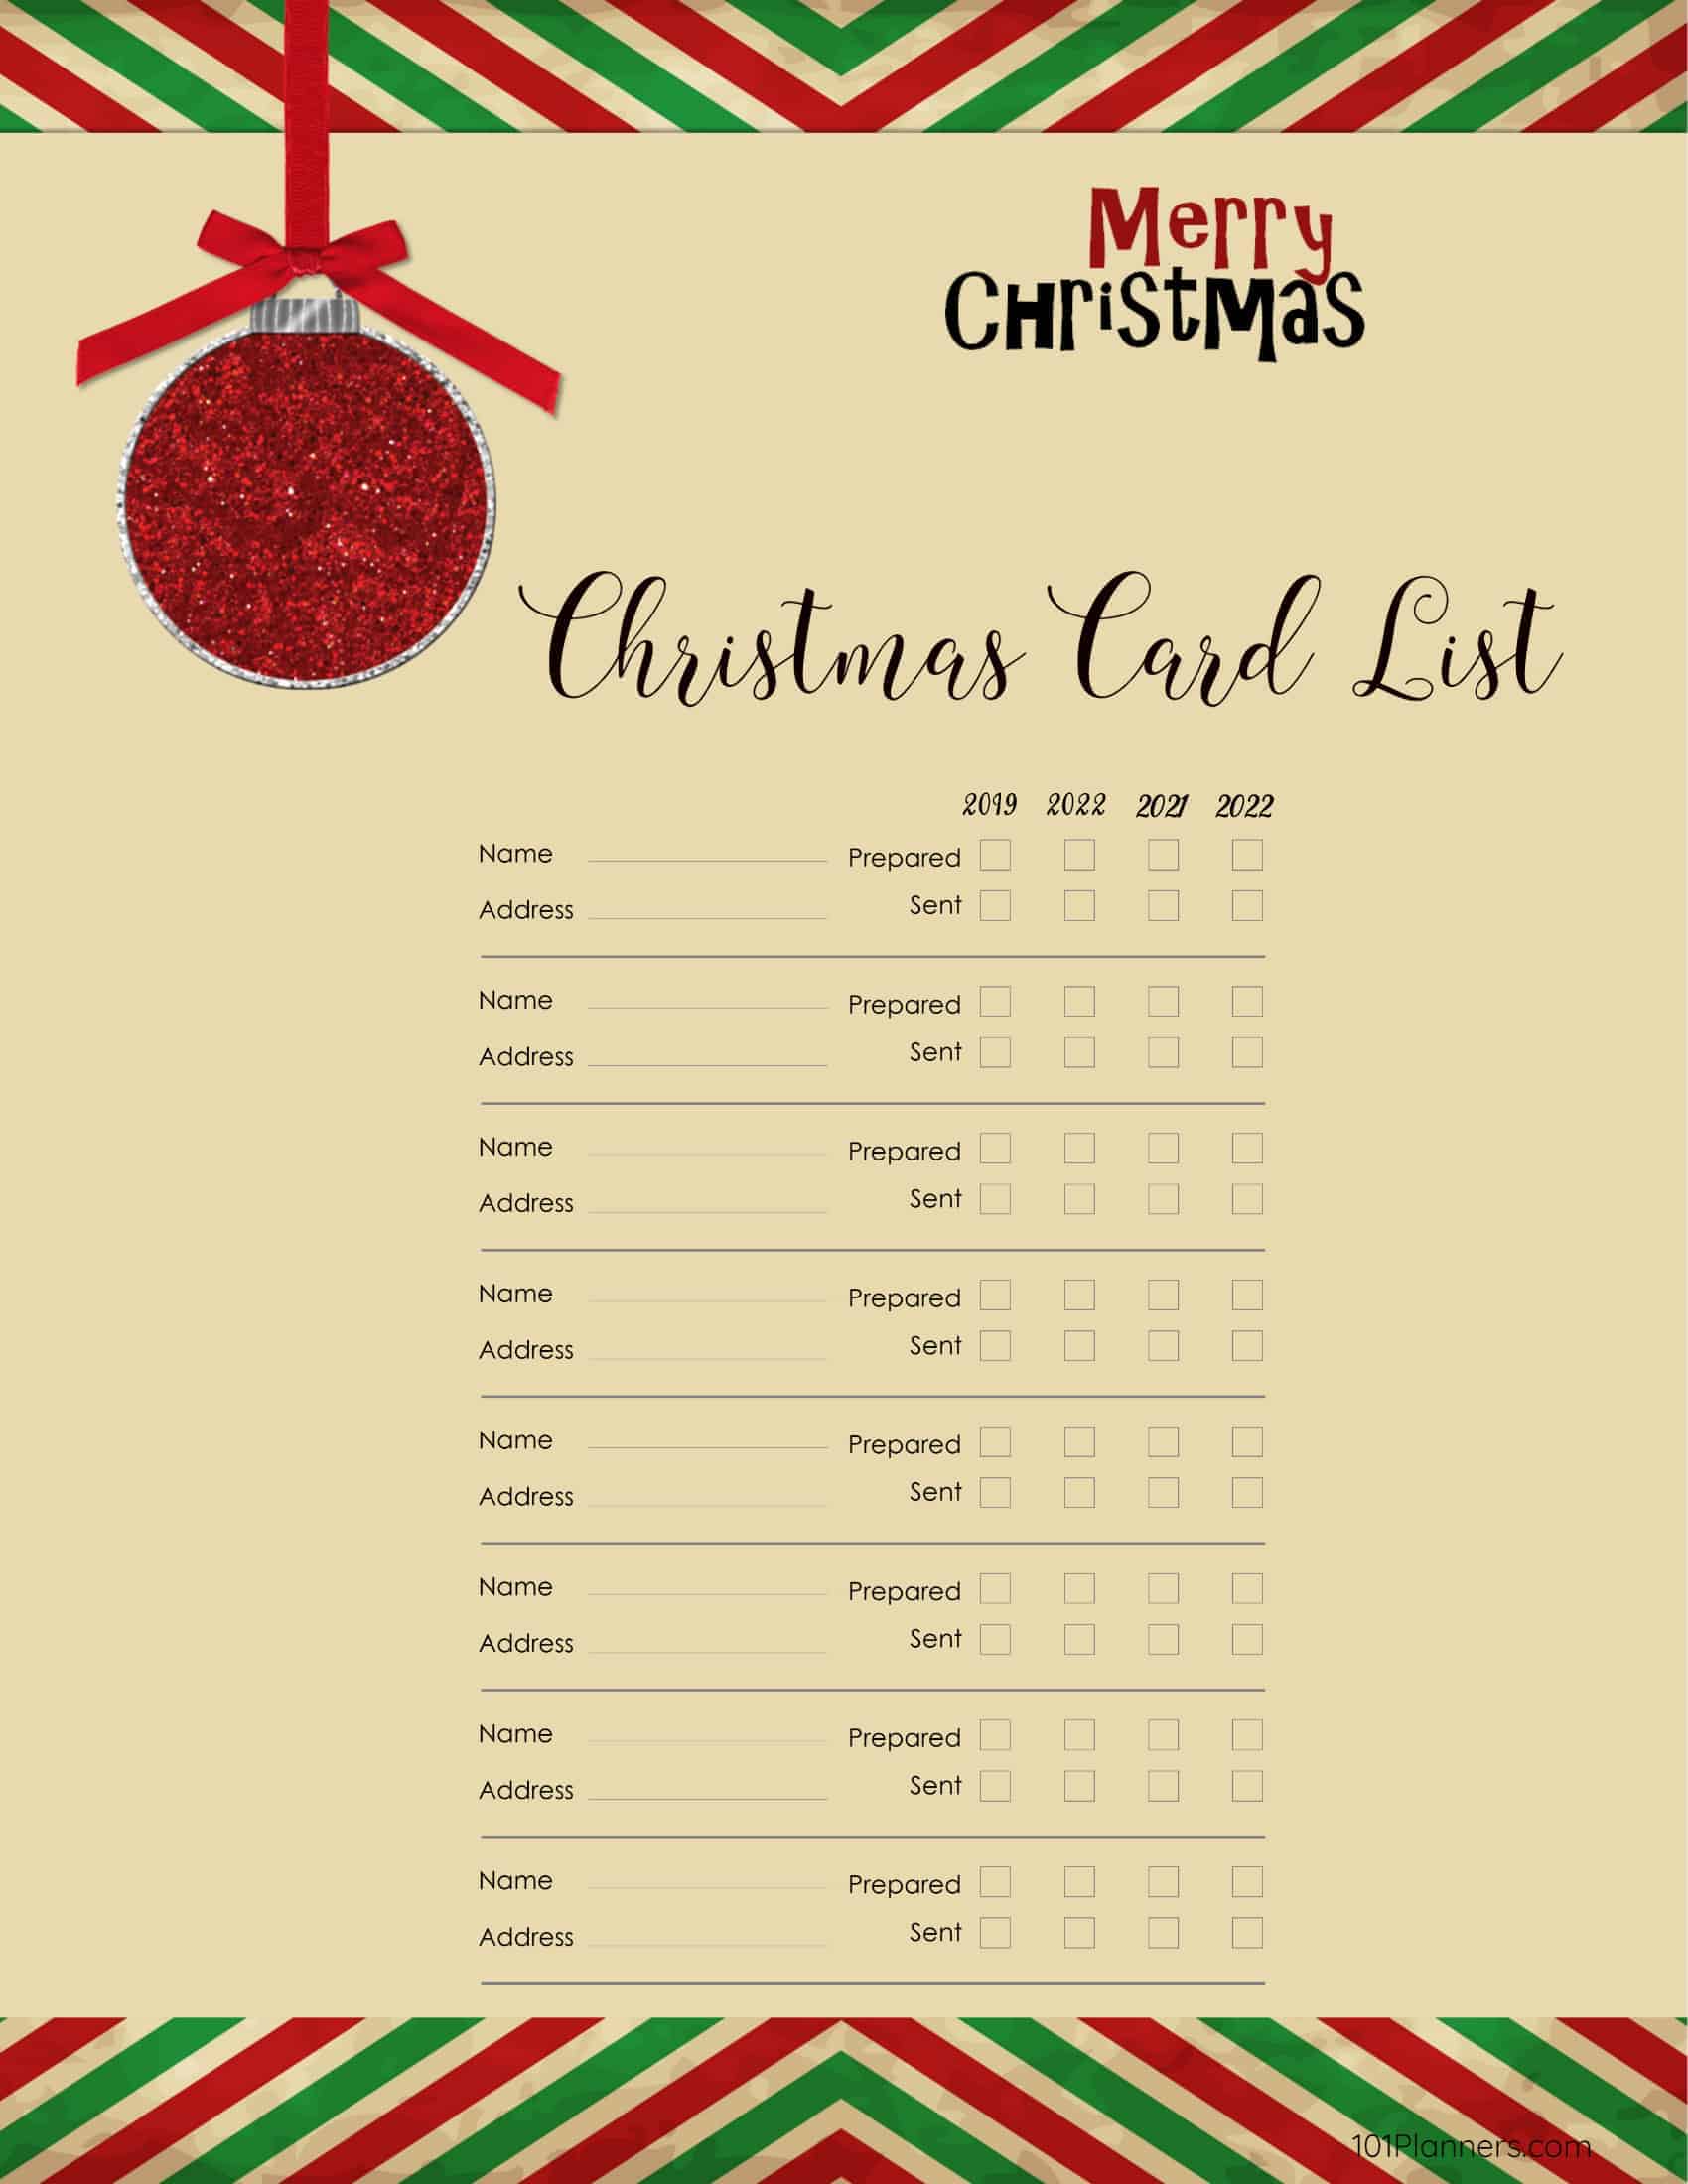 Christmas Card Address Book Template from www.101planners.com